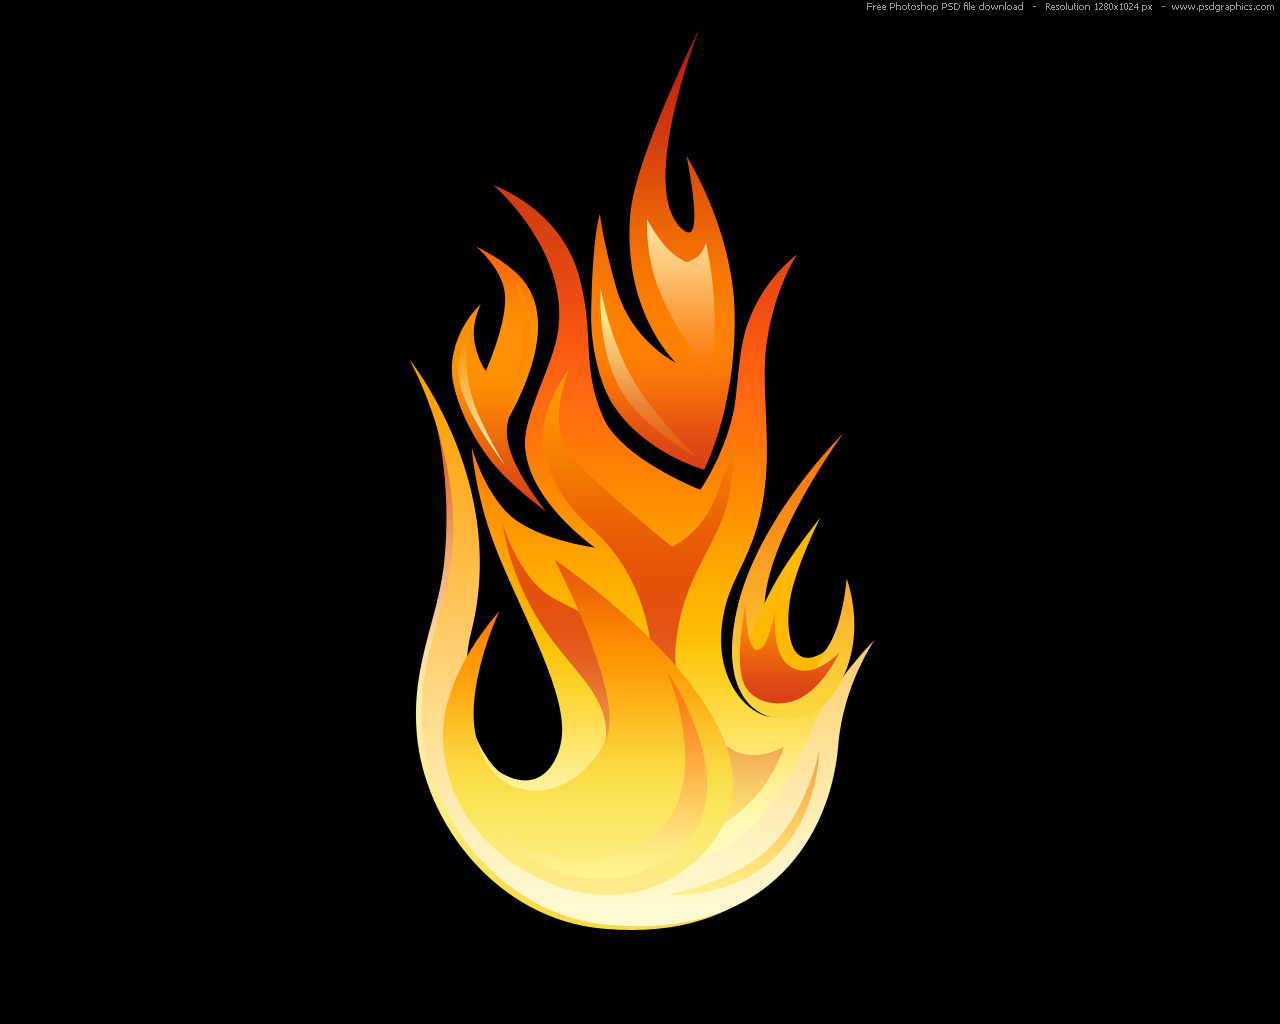 Black Fire Flames Wallpaper - Clipart Flame With Black Background , HD Wallpaper & Backgrounds